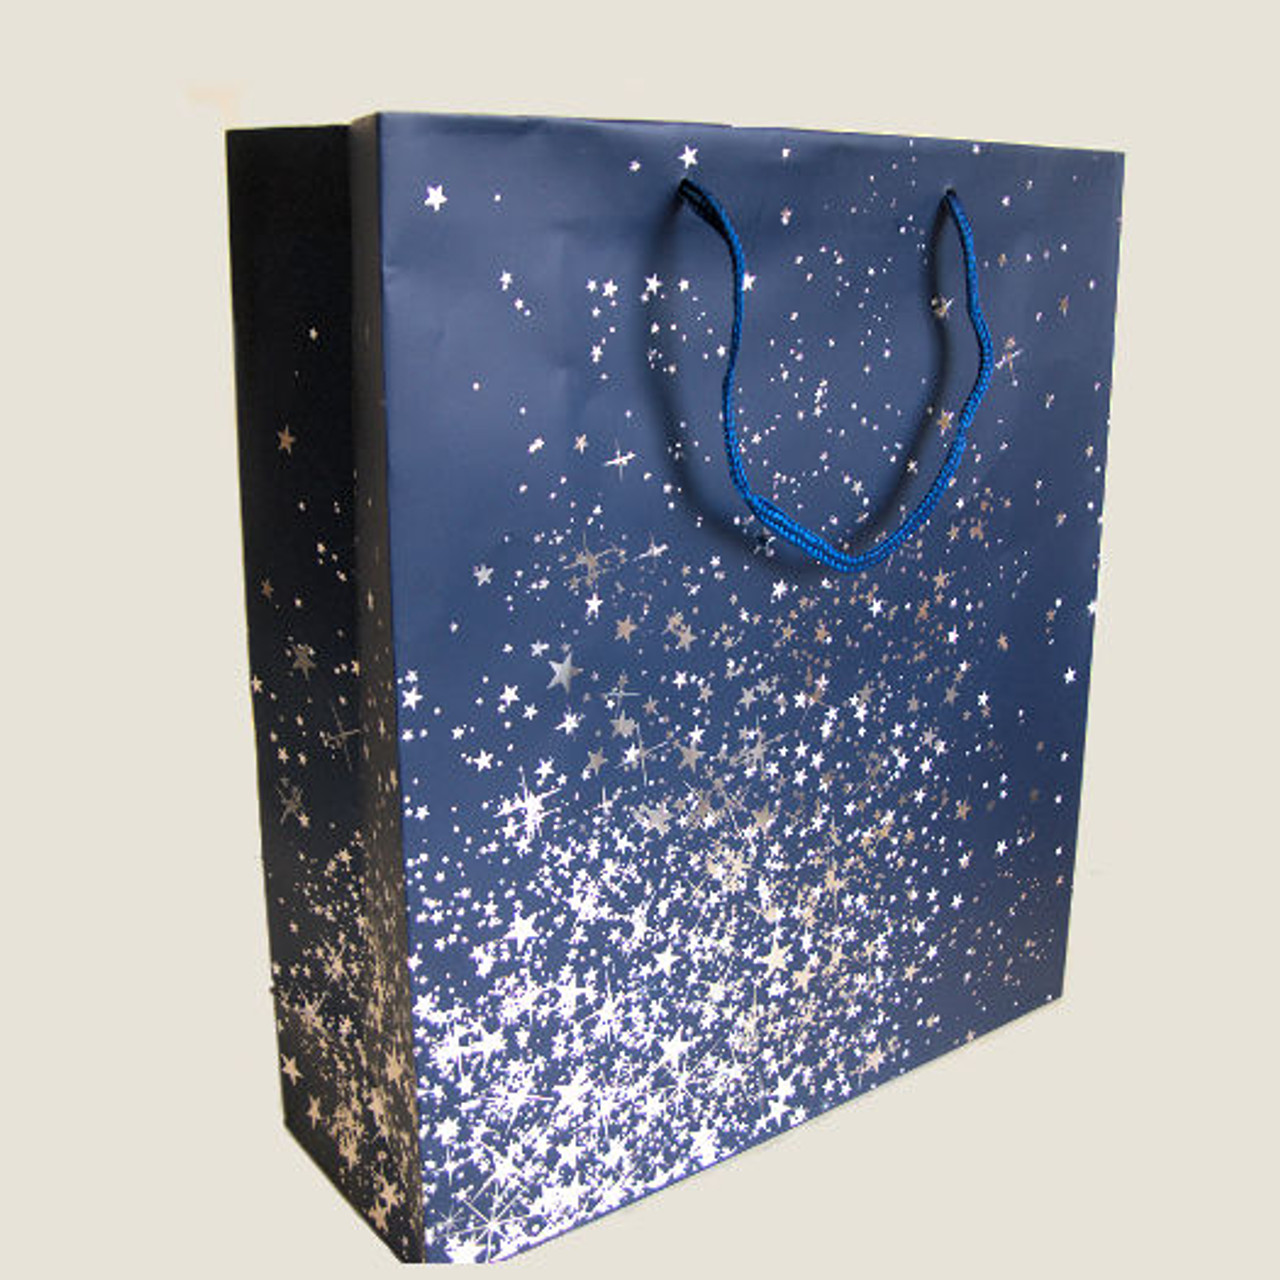 Quality paper rope handle Gift Carrier Bag blue background with siver stars